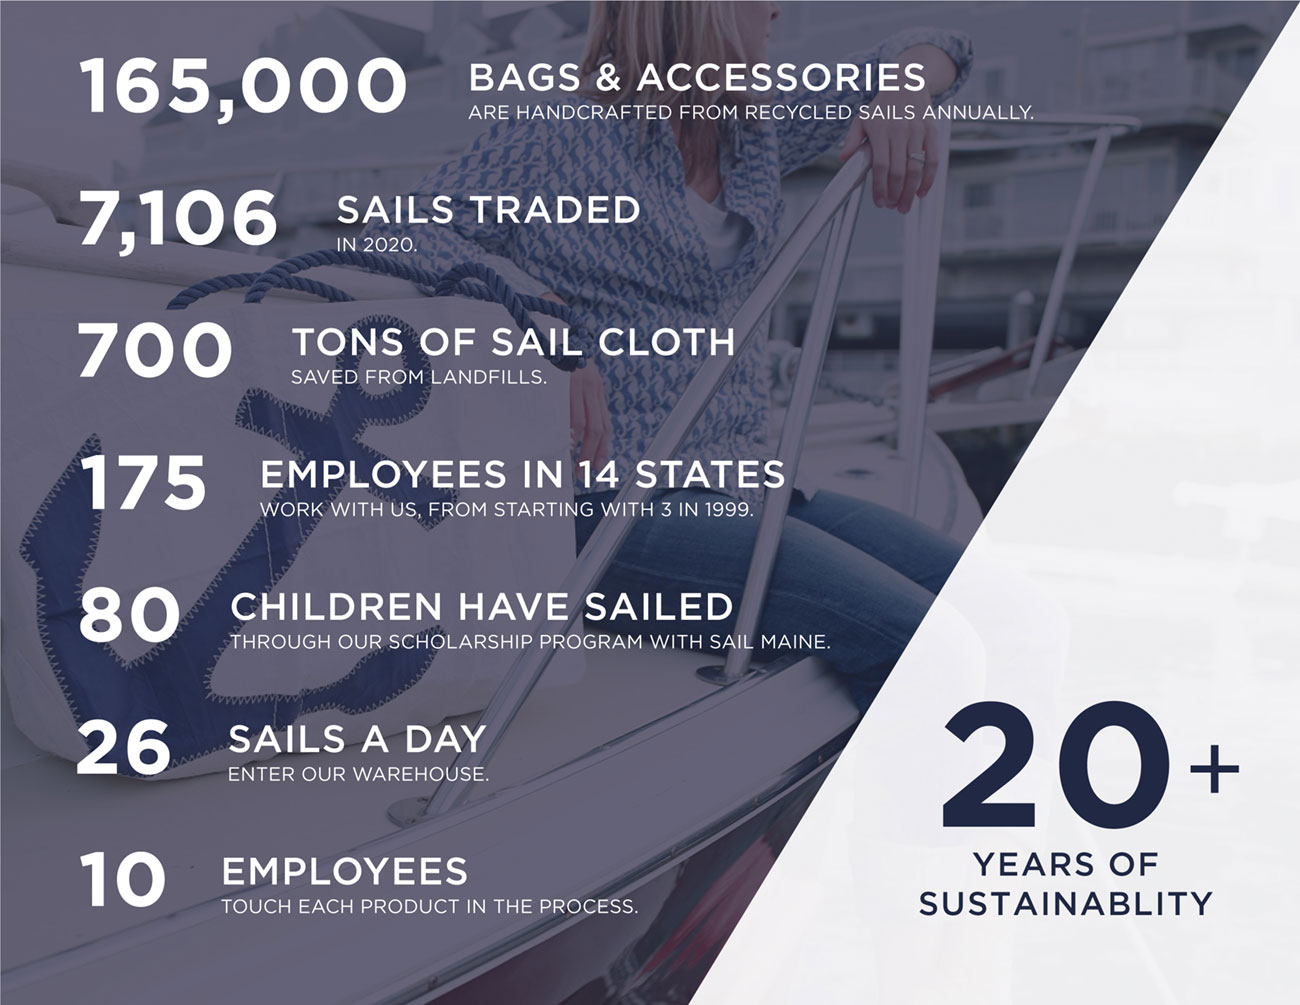 Sea Bags Infographic: 20 Years of Sustainability